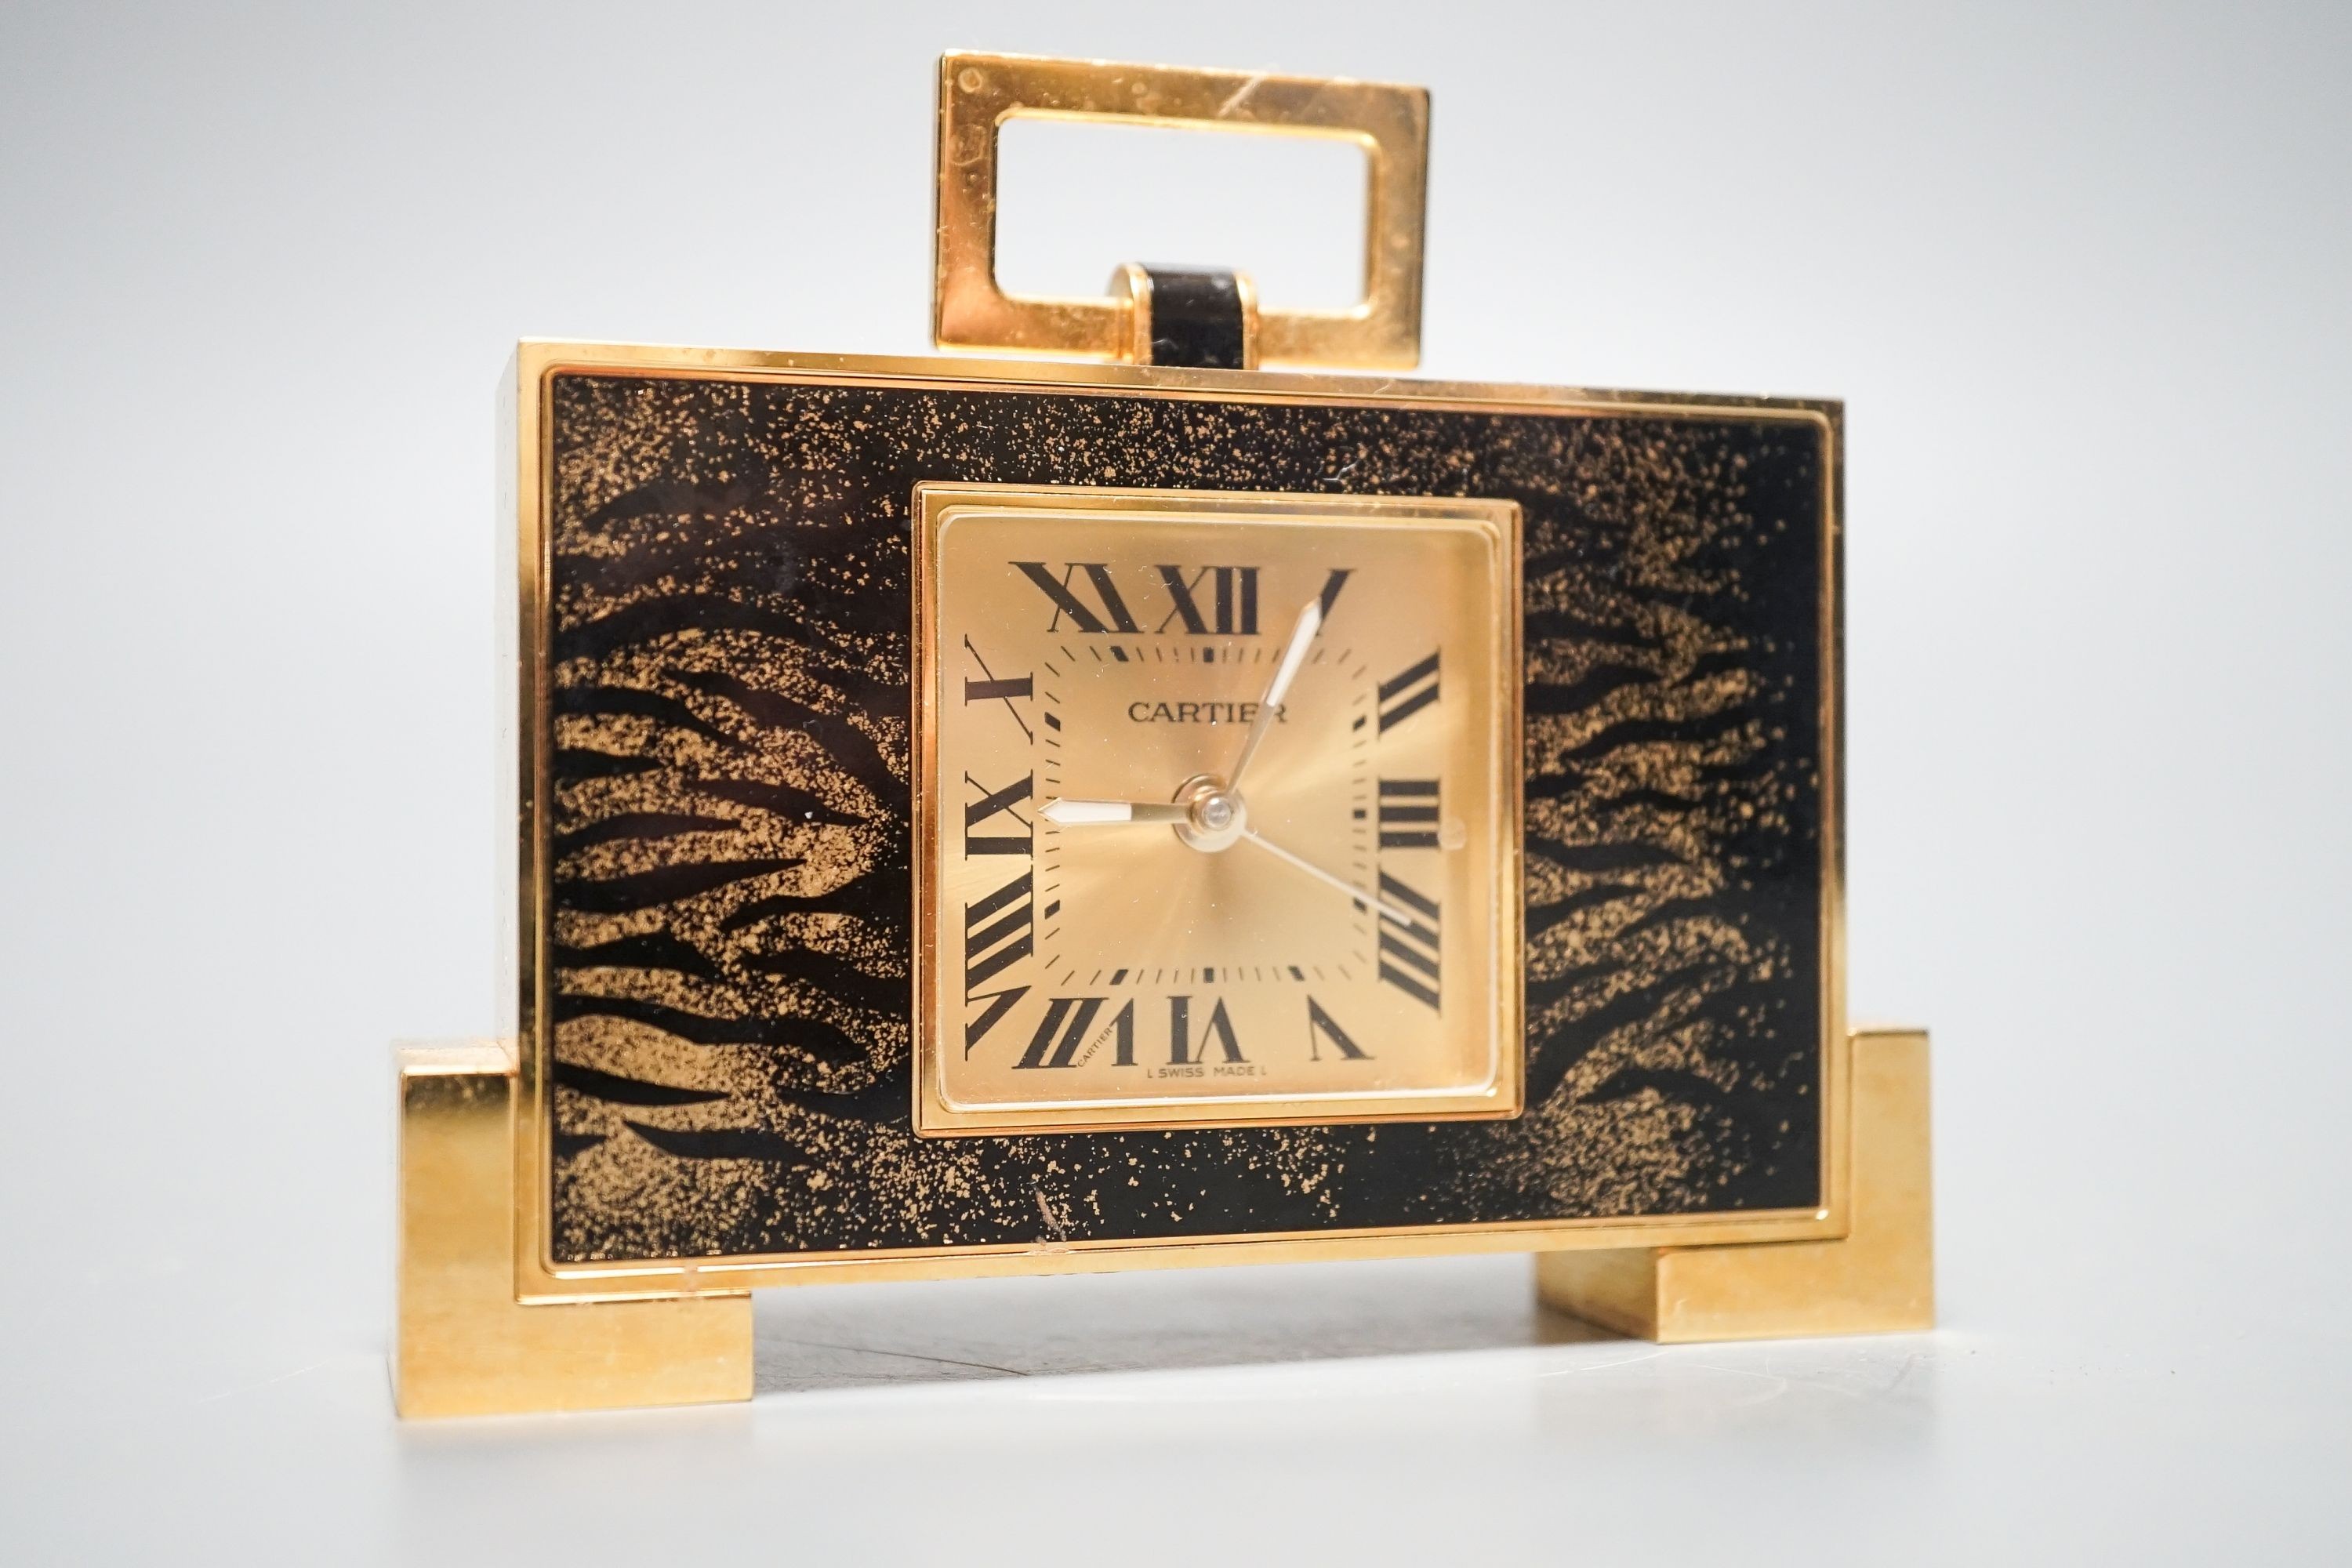 A cased Cartier gilt metal travelling clock, 10.5 cm wide, with certificate booklet